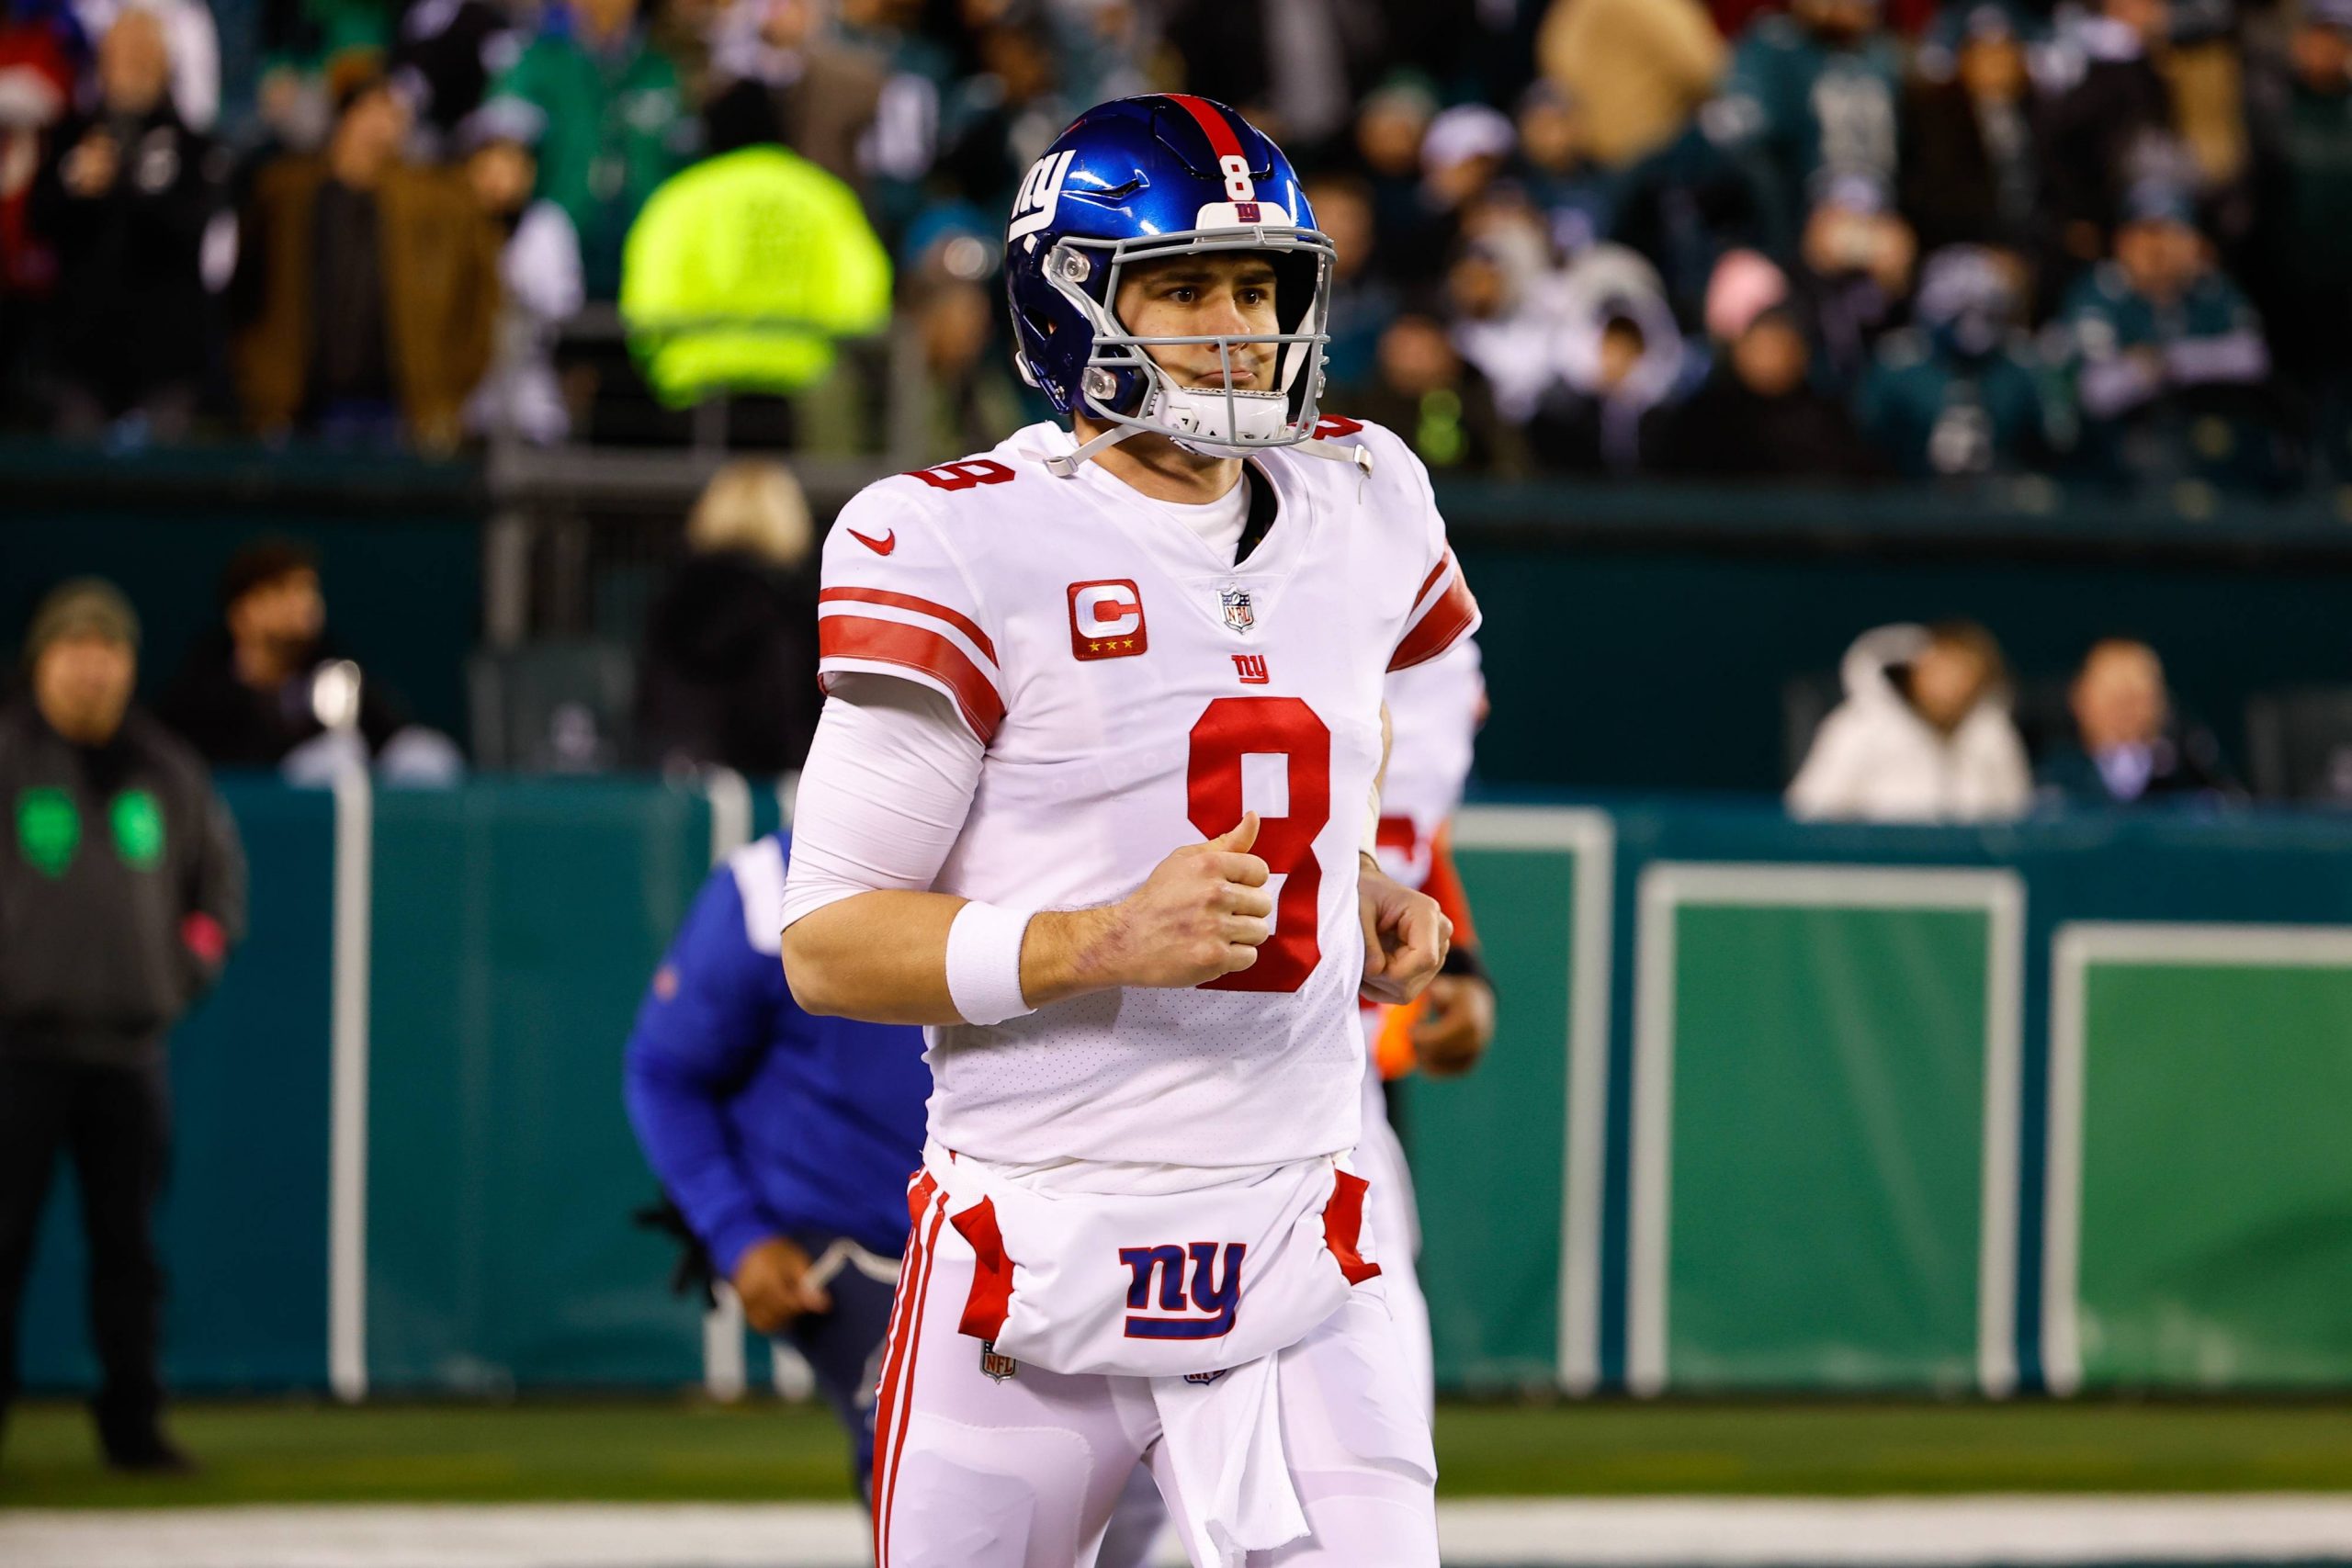 PHILADELPHIA, PA - JANUARY 21: New York Giants quarterback Daniel Jones 8 enters the field prior the NFC Divisional playoff game between the Philadelphia Eagles and the New York Giants on January 21, 2023 at Lincoln Financial Field in Philadelphia, Pennsylvania. Photo by Rich Graessle/Icon Sportswire NFL, American Football Herren, USA JAN 21 NFC Divisional Playoffs - Giants at Eagles Icon23012112838